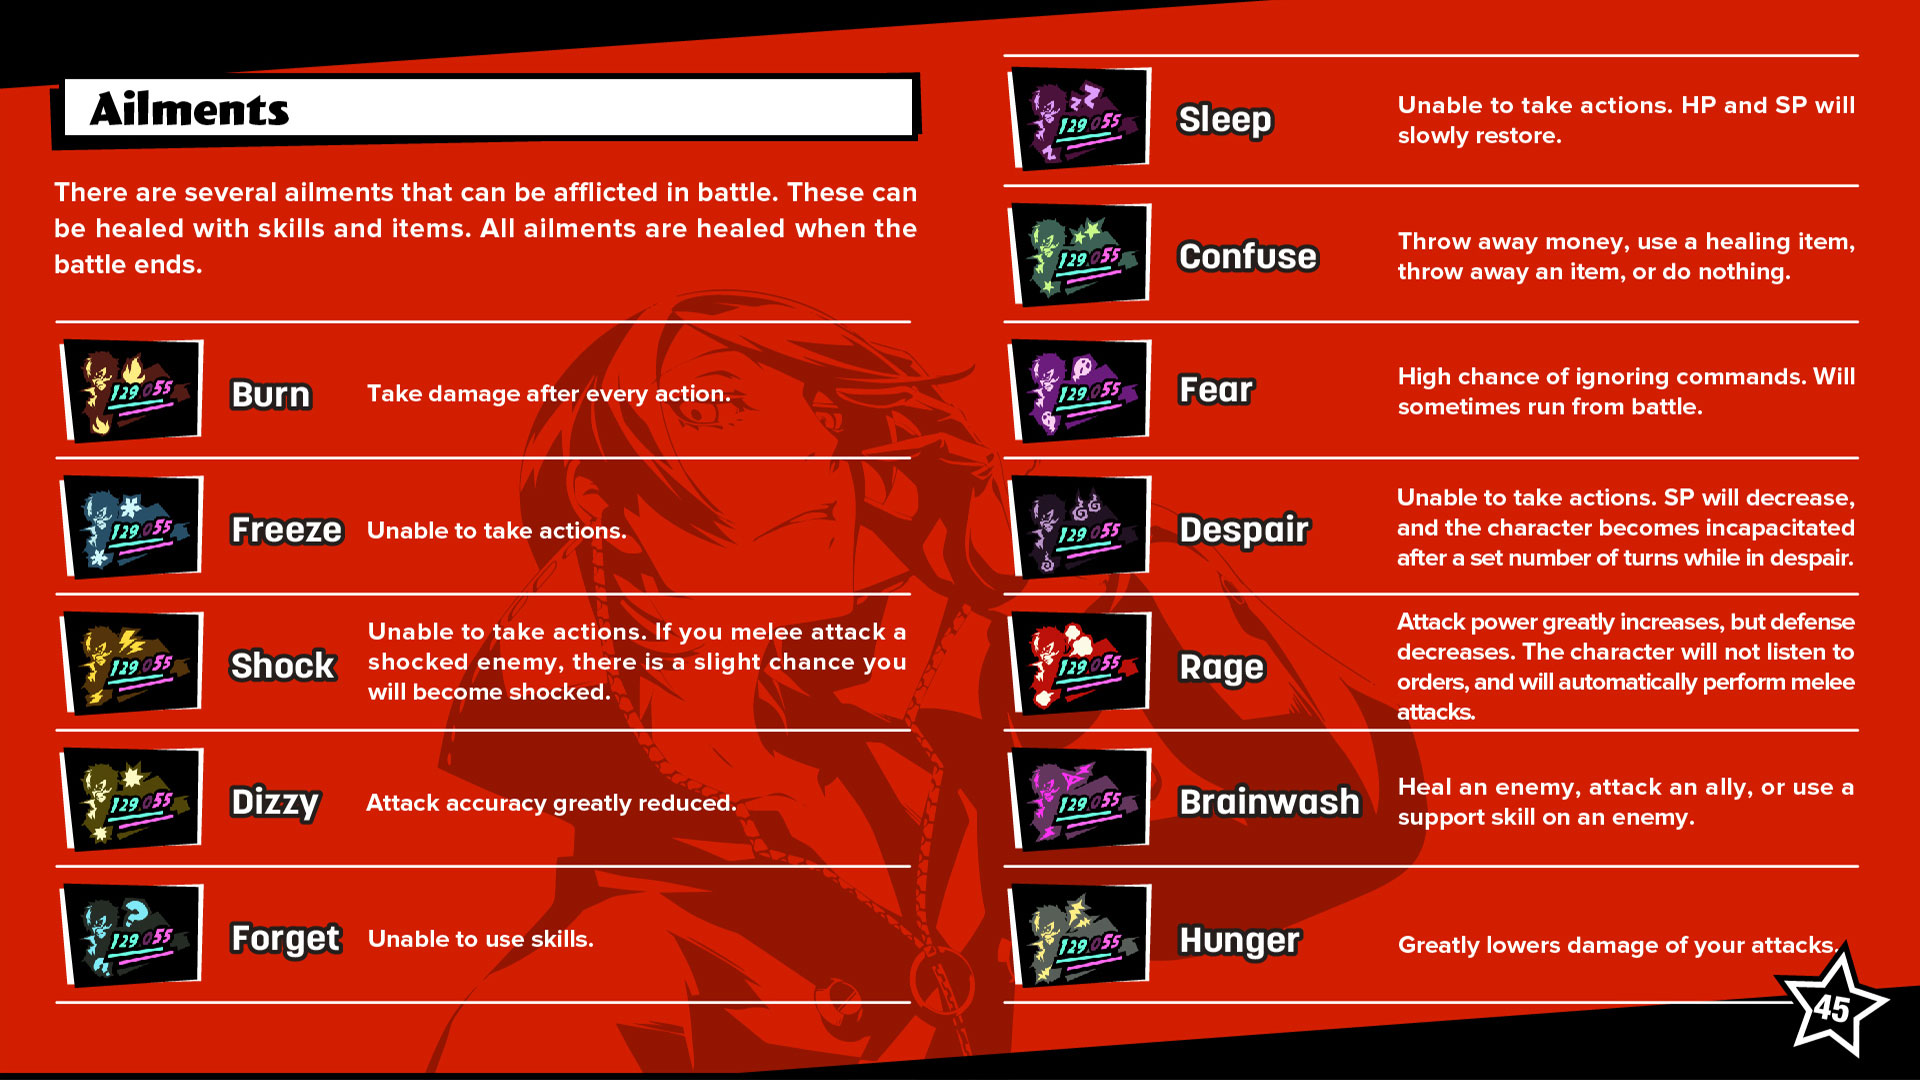 Guide for Persona 5 Royal Game, Walkthrough, Review, Best Weapons, Stats,  Best Equipment, DLC, Unofficial - Master Gamer - E-book - BookBeat